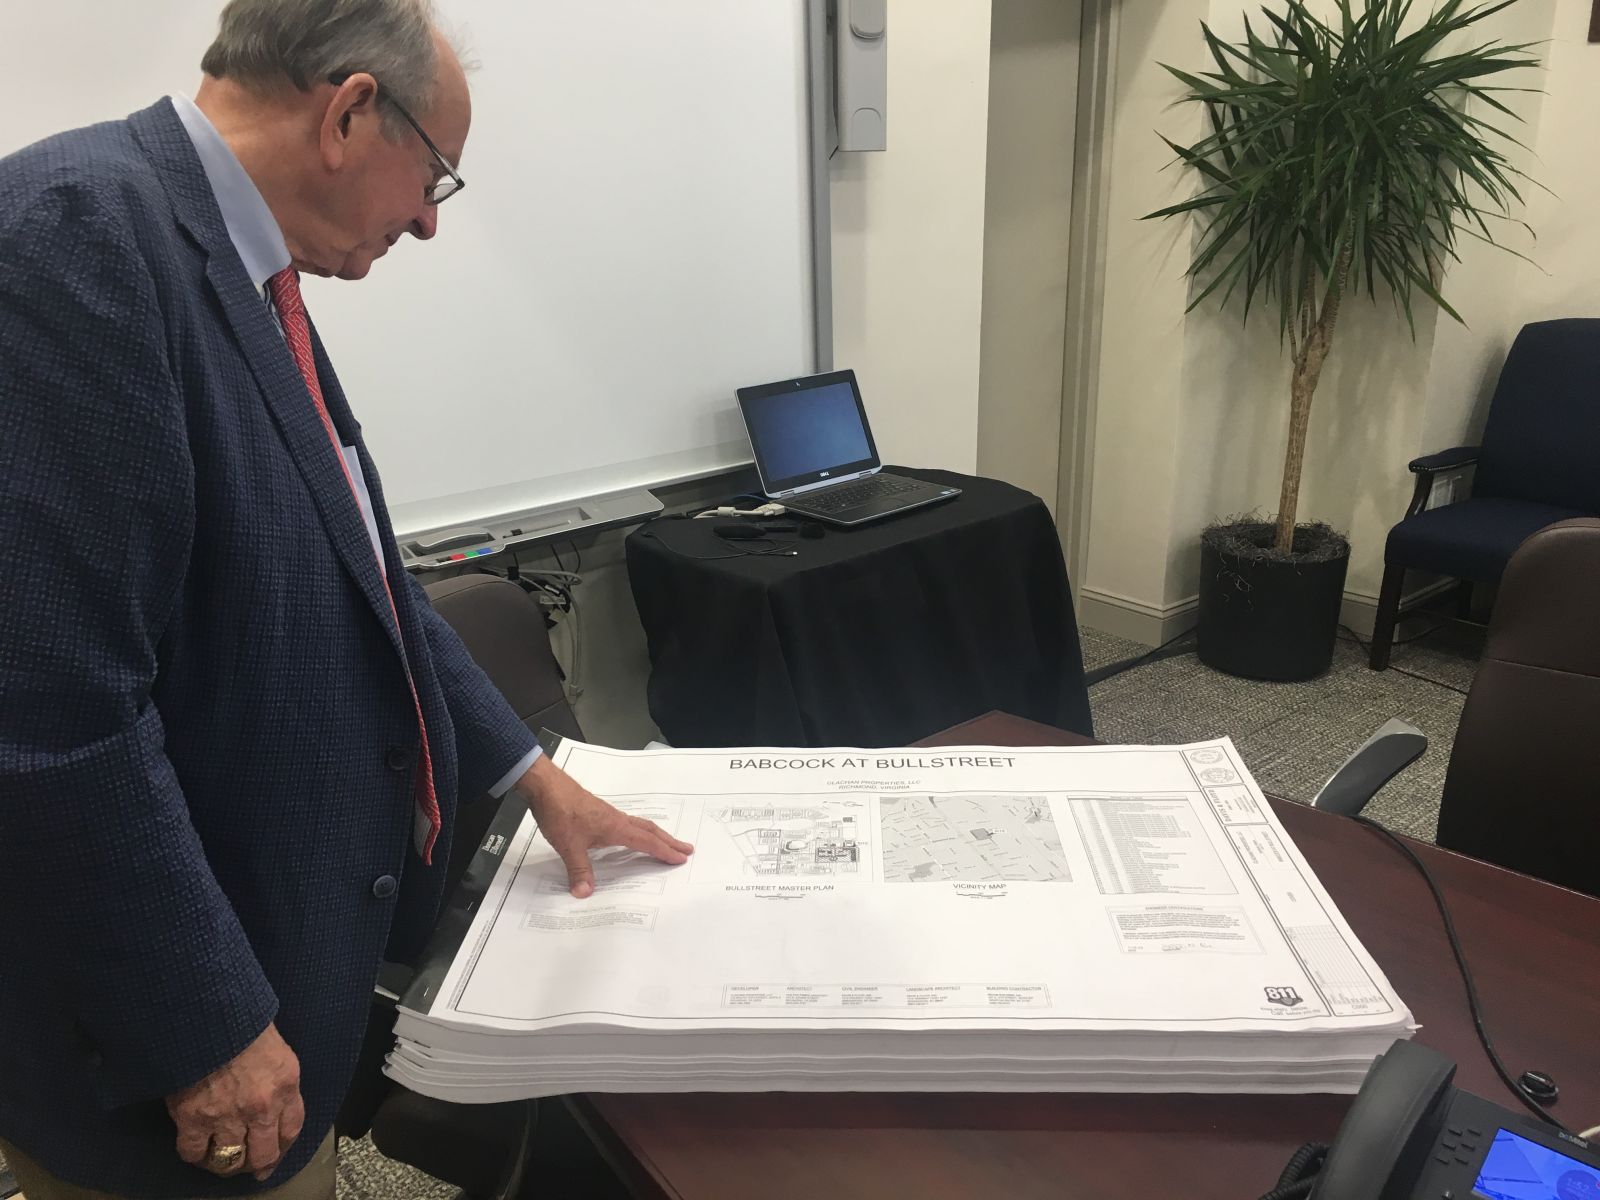 Columbia City Councilman Howard Duvall, chair of the Bull Street commission, examines plans for luxury apartments at the Babcock building in the BullStreet District. (Photo/Ren??e Sexton)